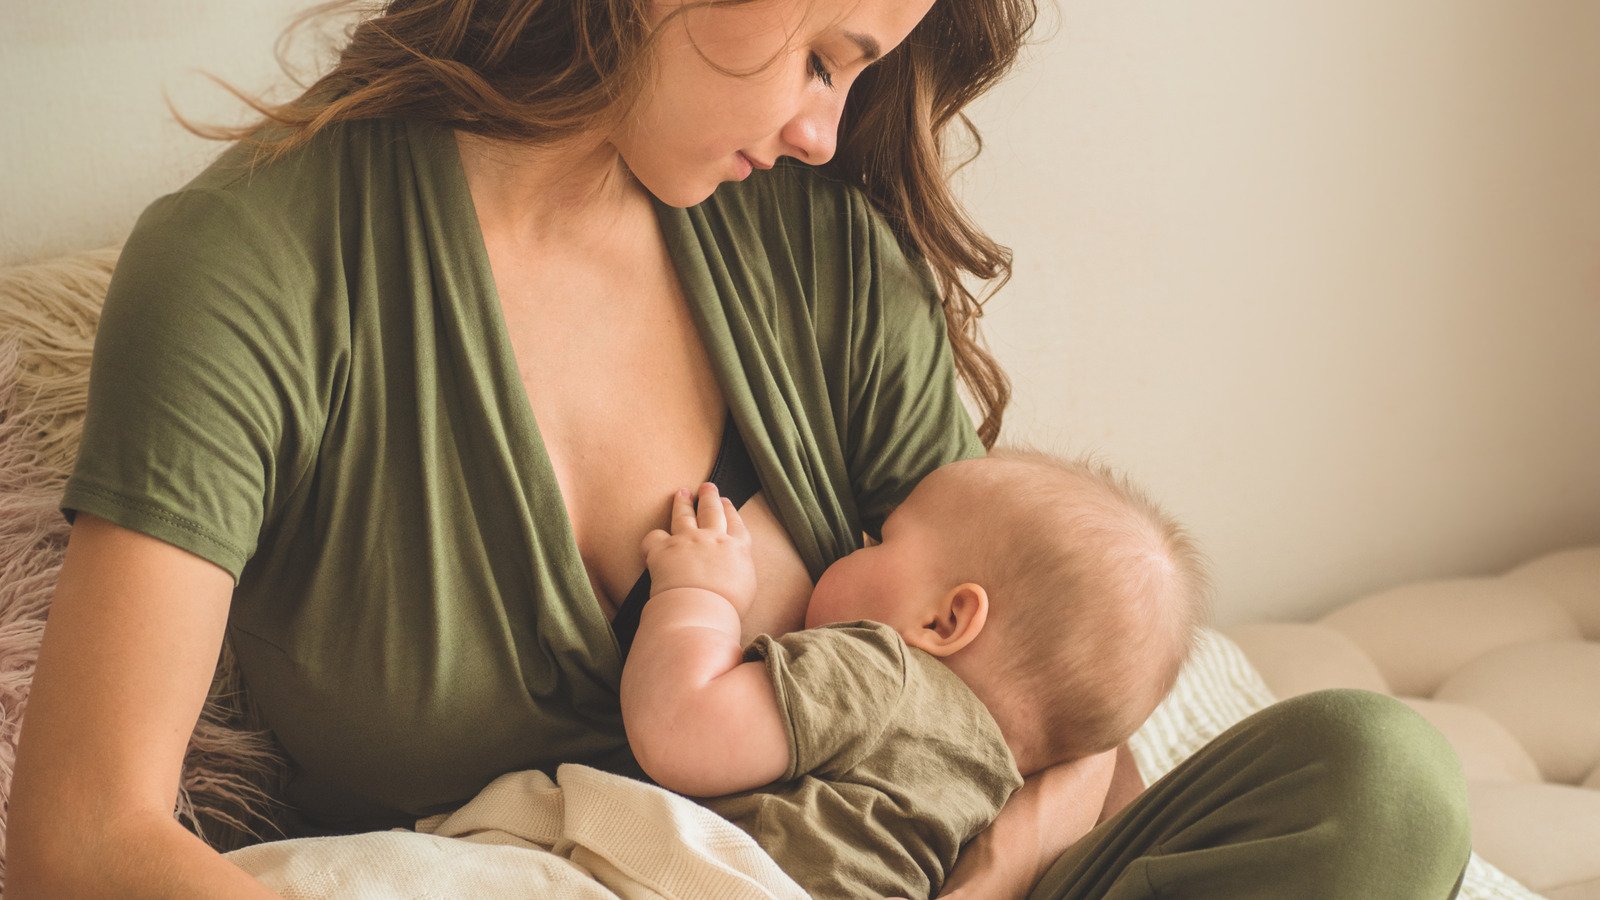 What Happens When You Get Pregnant While Breastfeeding? - Health Digest